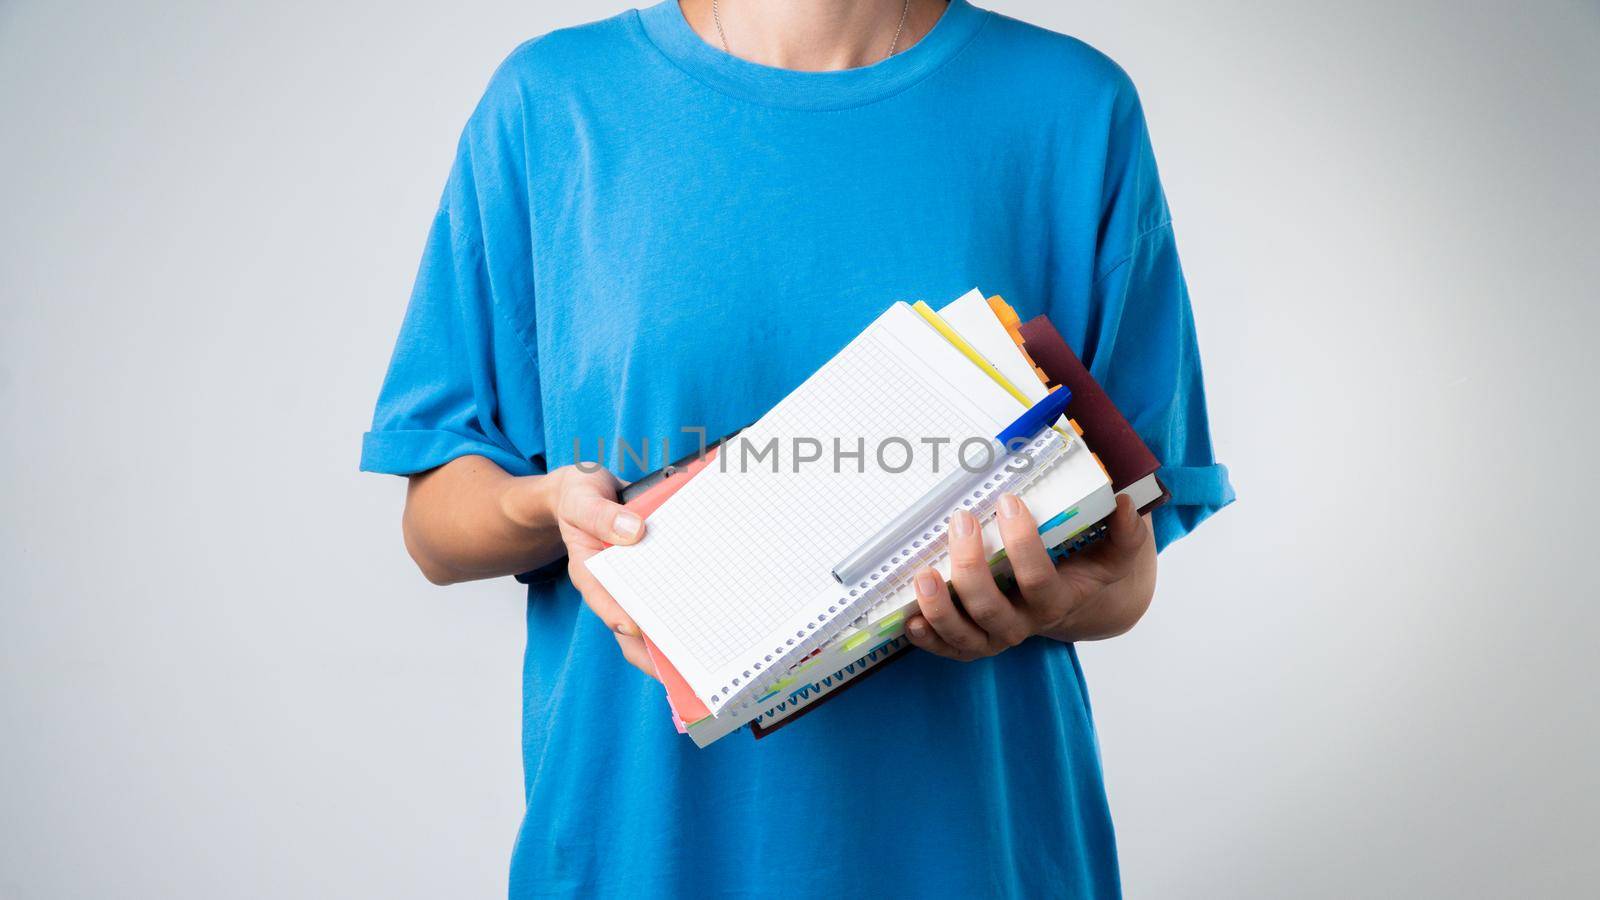 Female student with books and notebooks in her hands - training. High quality photo